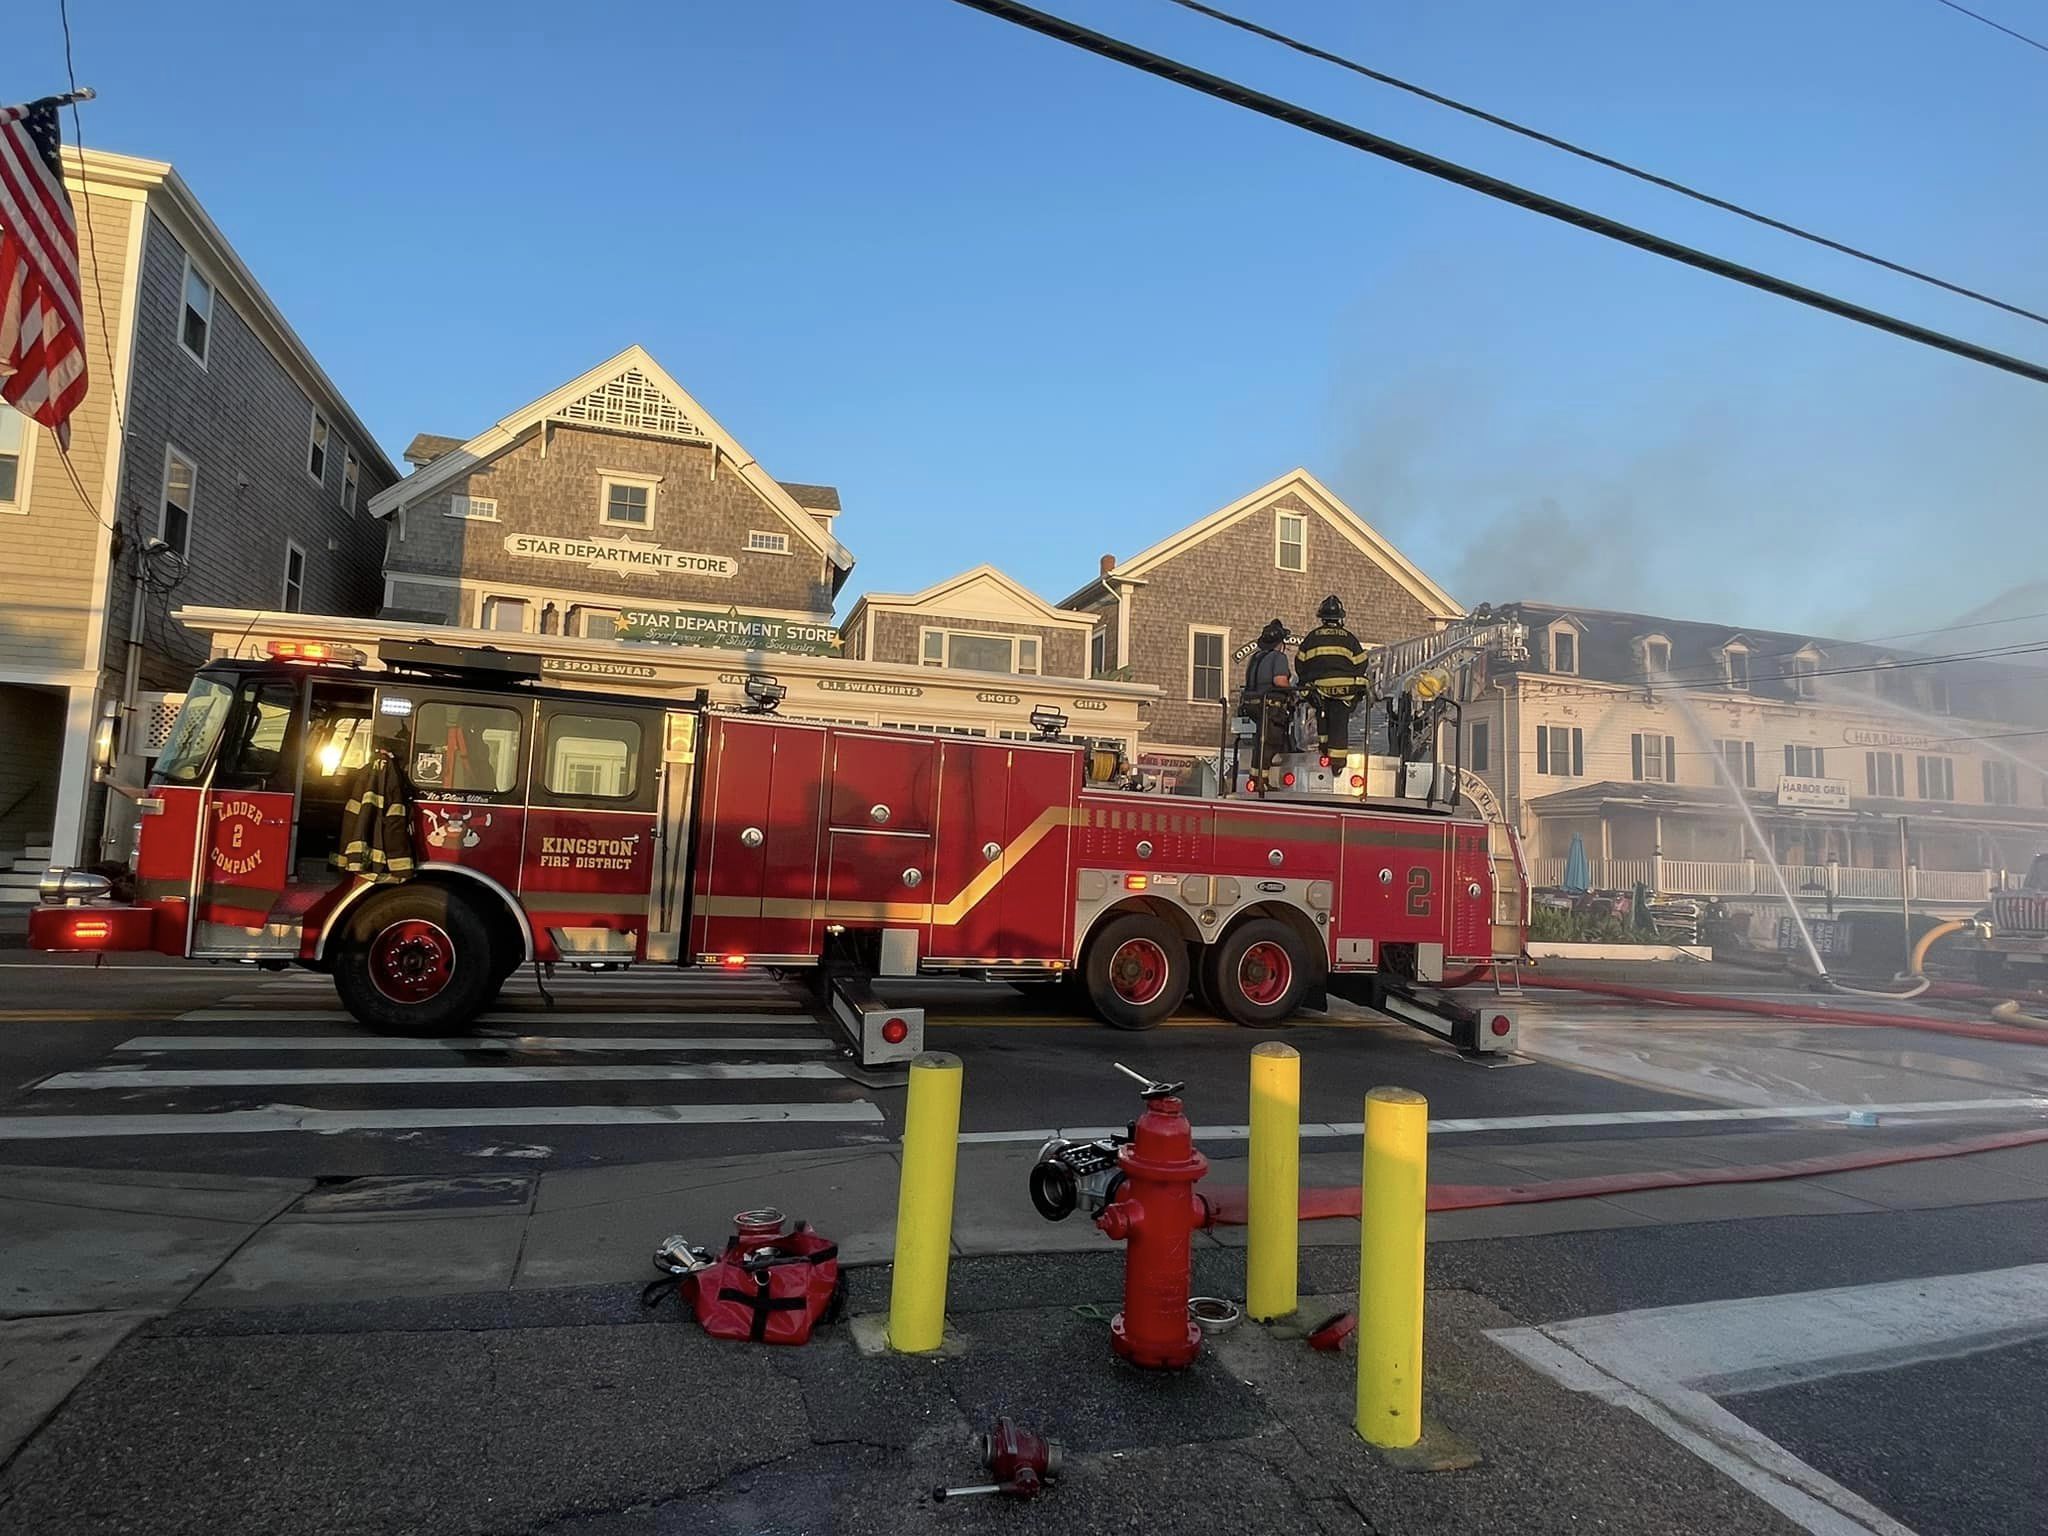 Report: Grease buildup likely fueled Harborside Inn fire